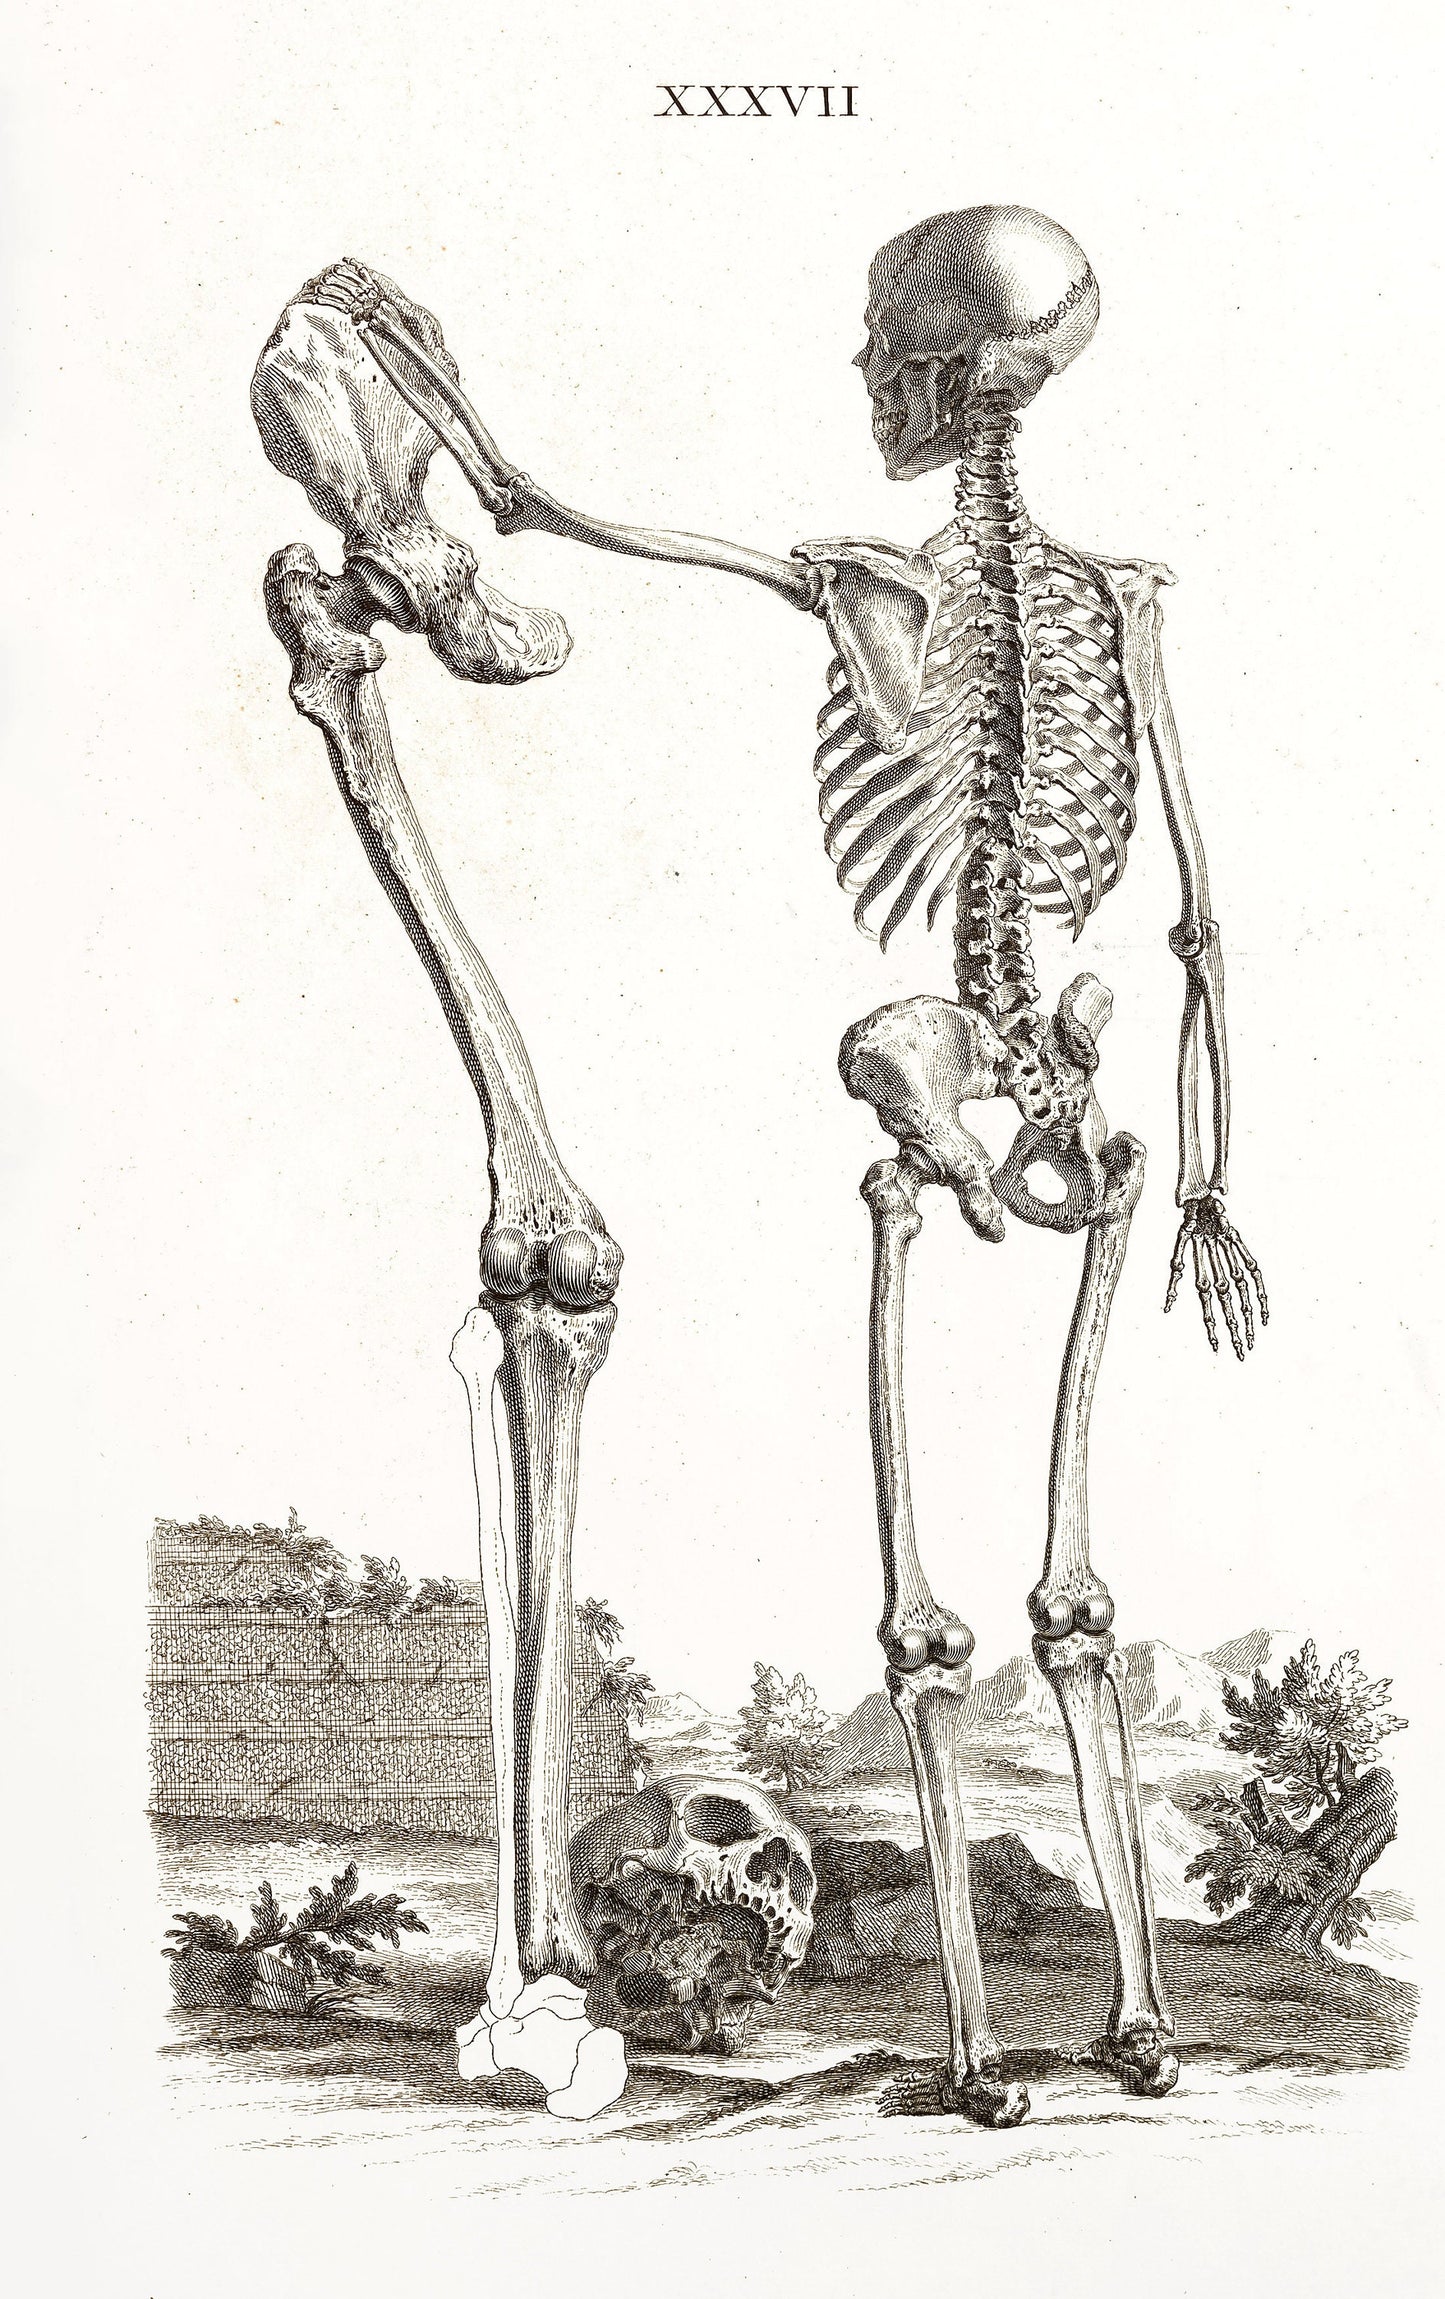 Osteographia or The Anatomy of the Bones Whitened Set 2 [61 Images]